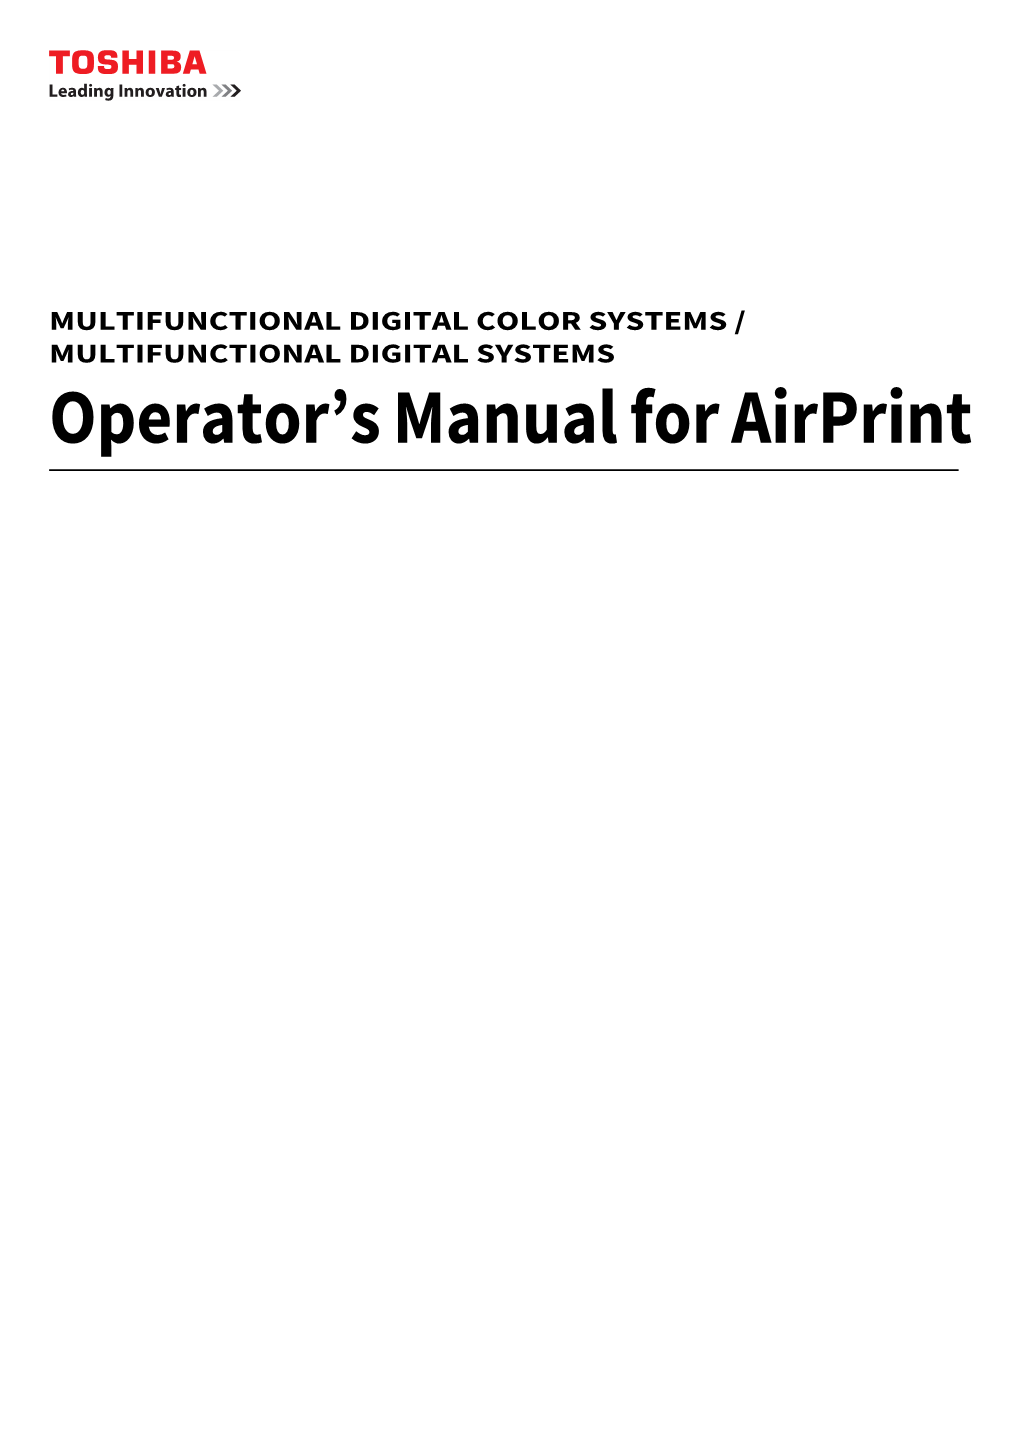 Operator's Manual for Airprint